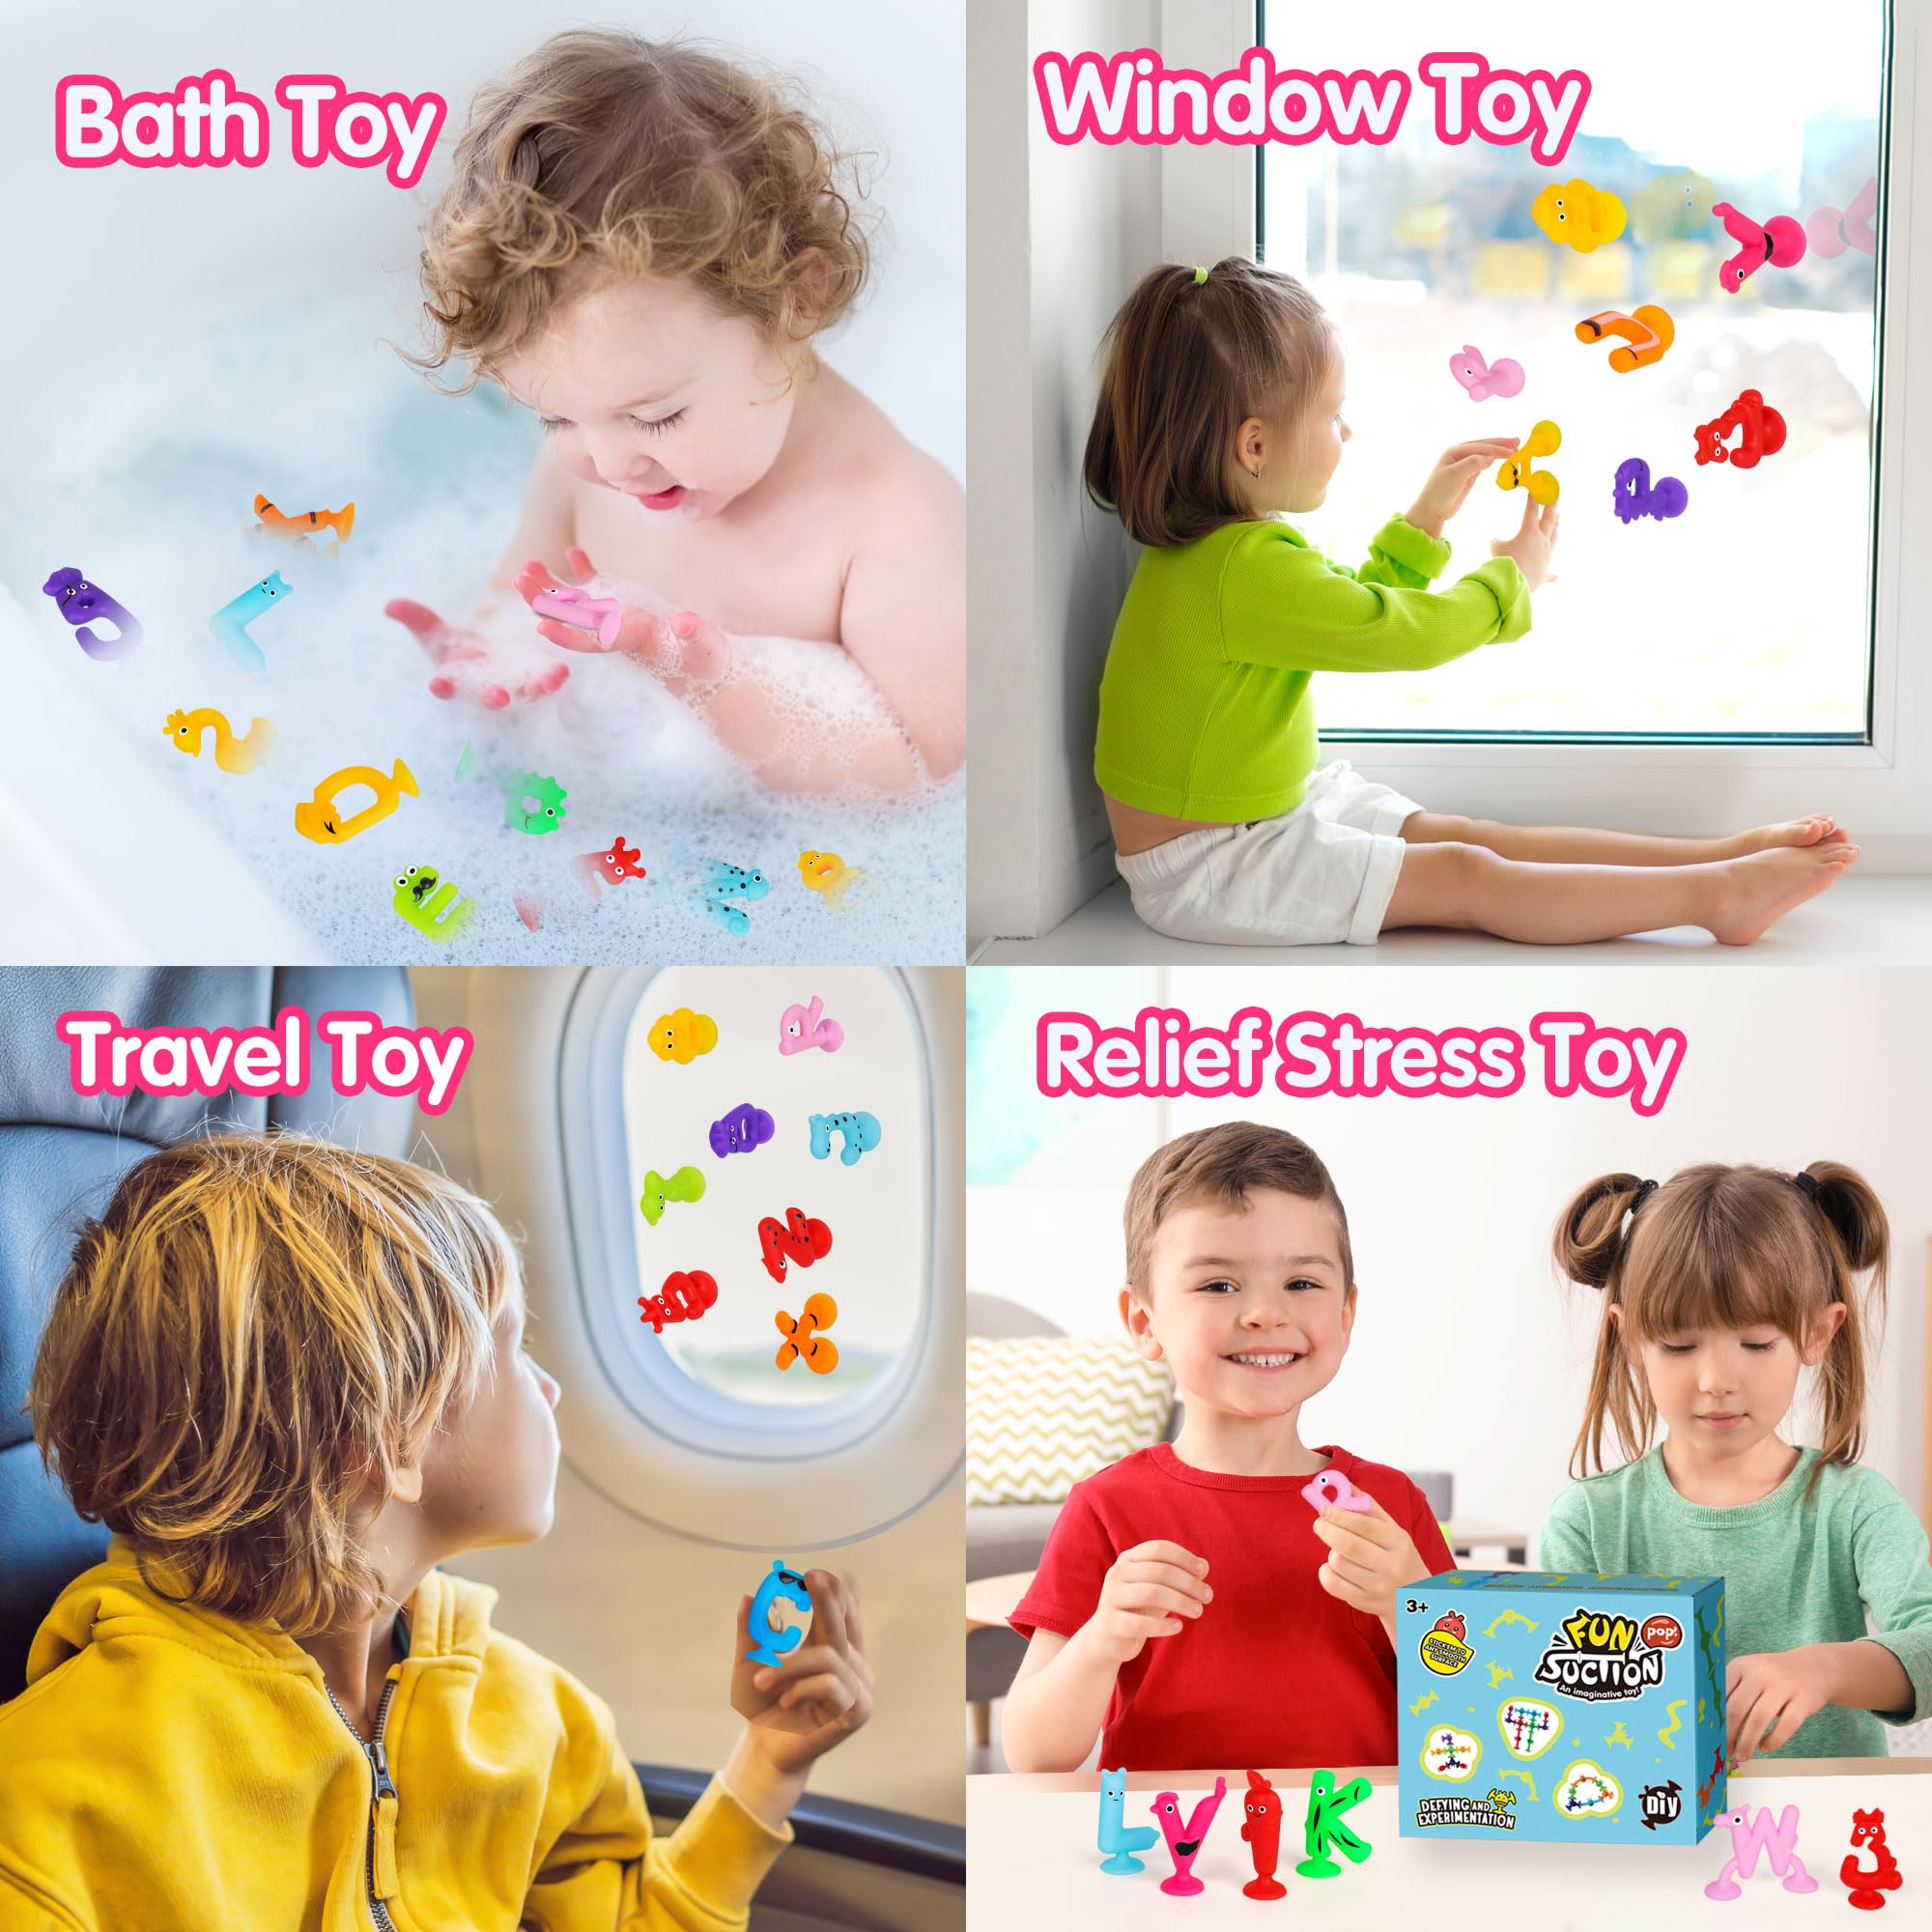 Suction Toys Kids Bath Toy for Toddler Aged 3, 30PCS Silicone Animal Alphabet Number Sucker Toy, Montessori Sensory Toy Gift for Kids Aged 4-8, Educational Spelling Fidget Toys for Autism/ADD/ADHD